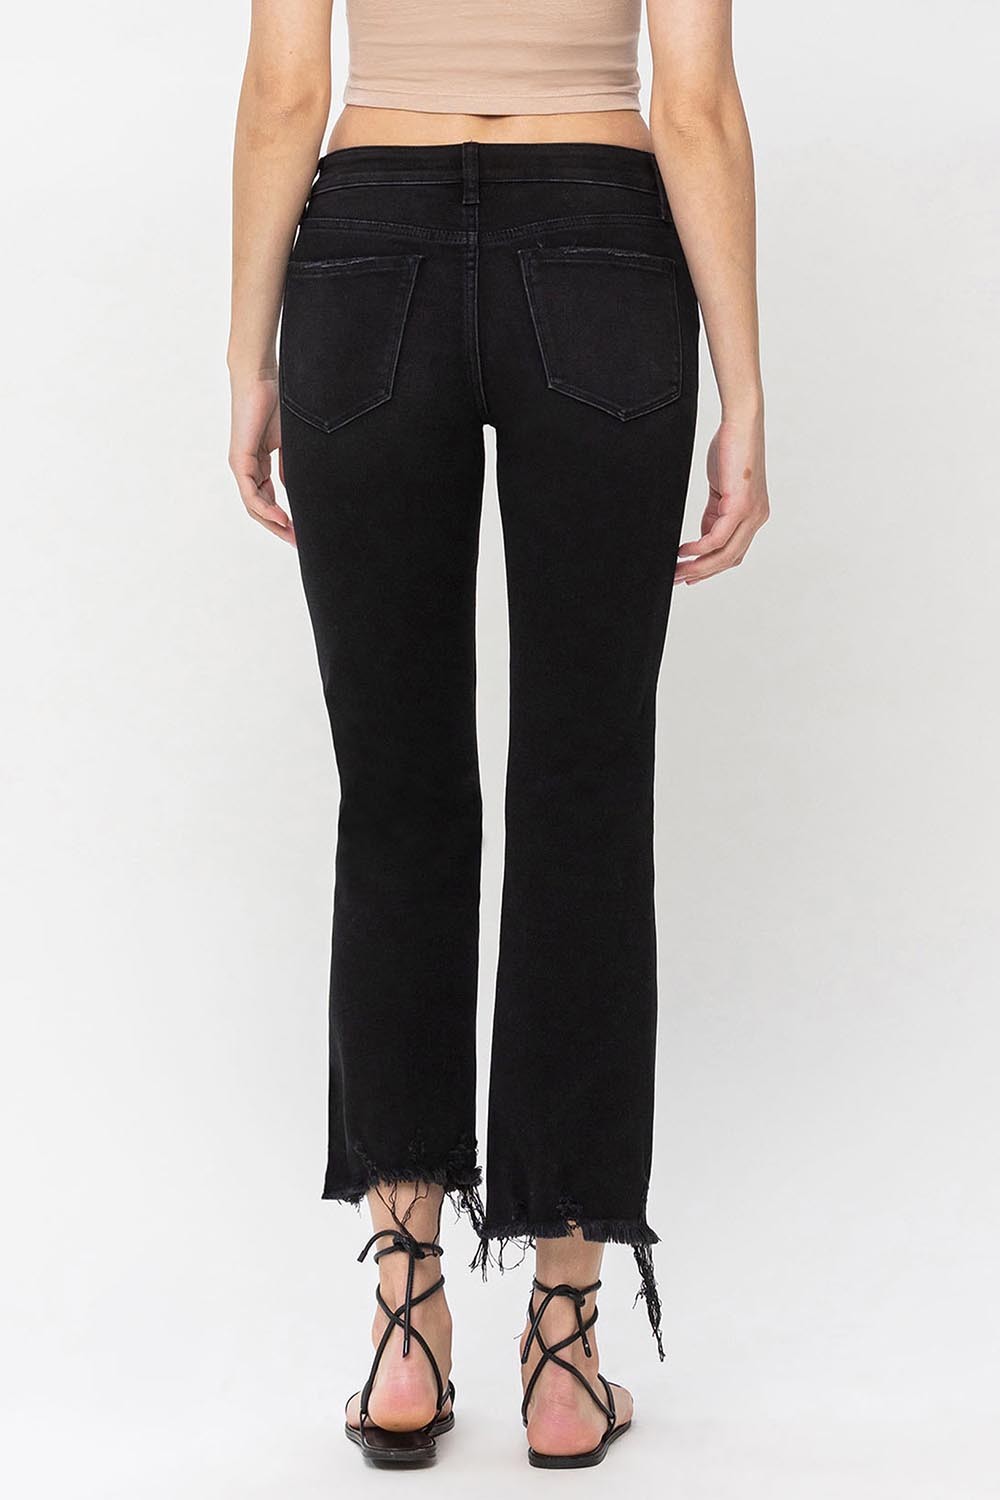 "Neely" Mid Rise Crop Flare Jeans 1-18W